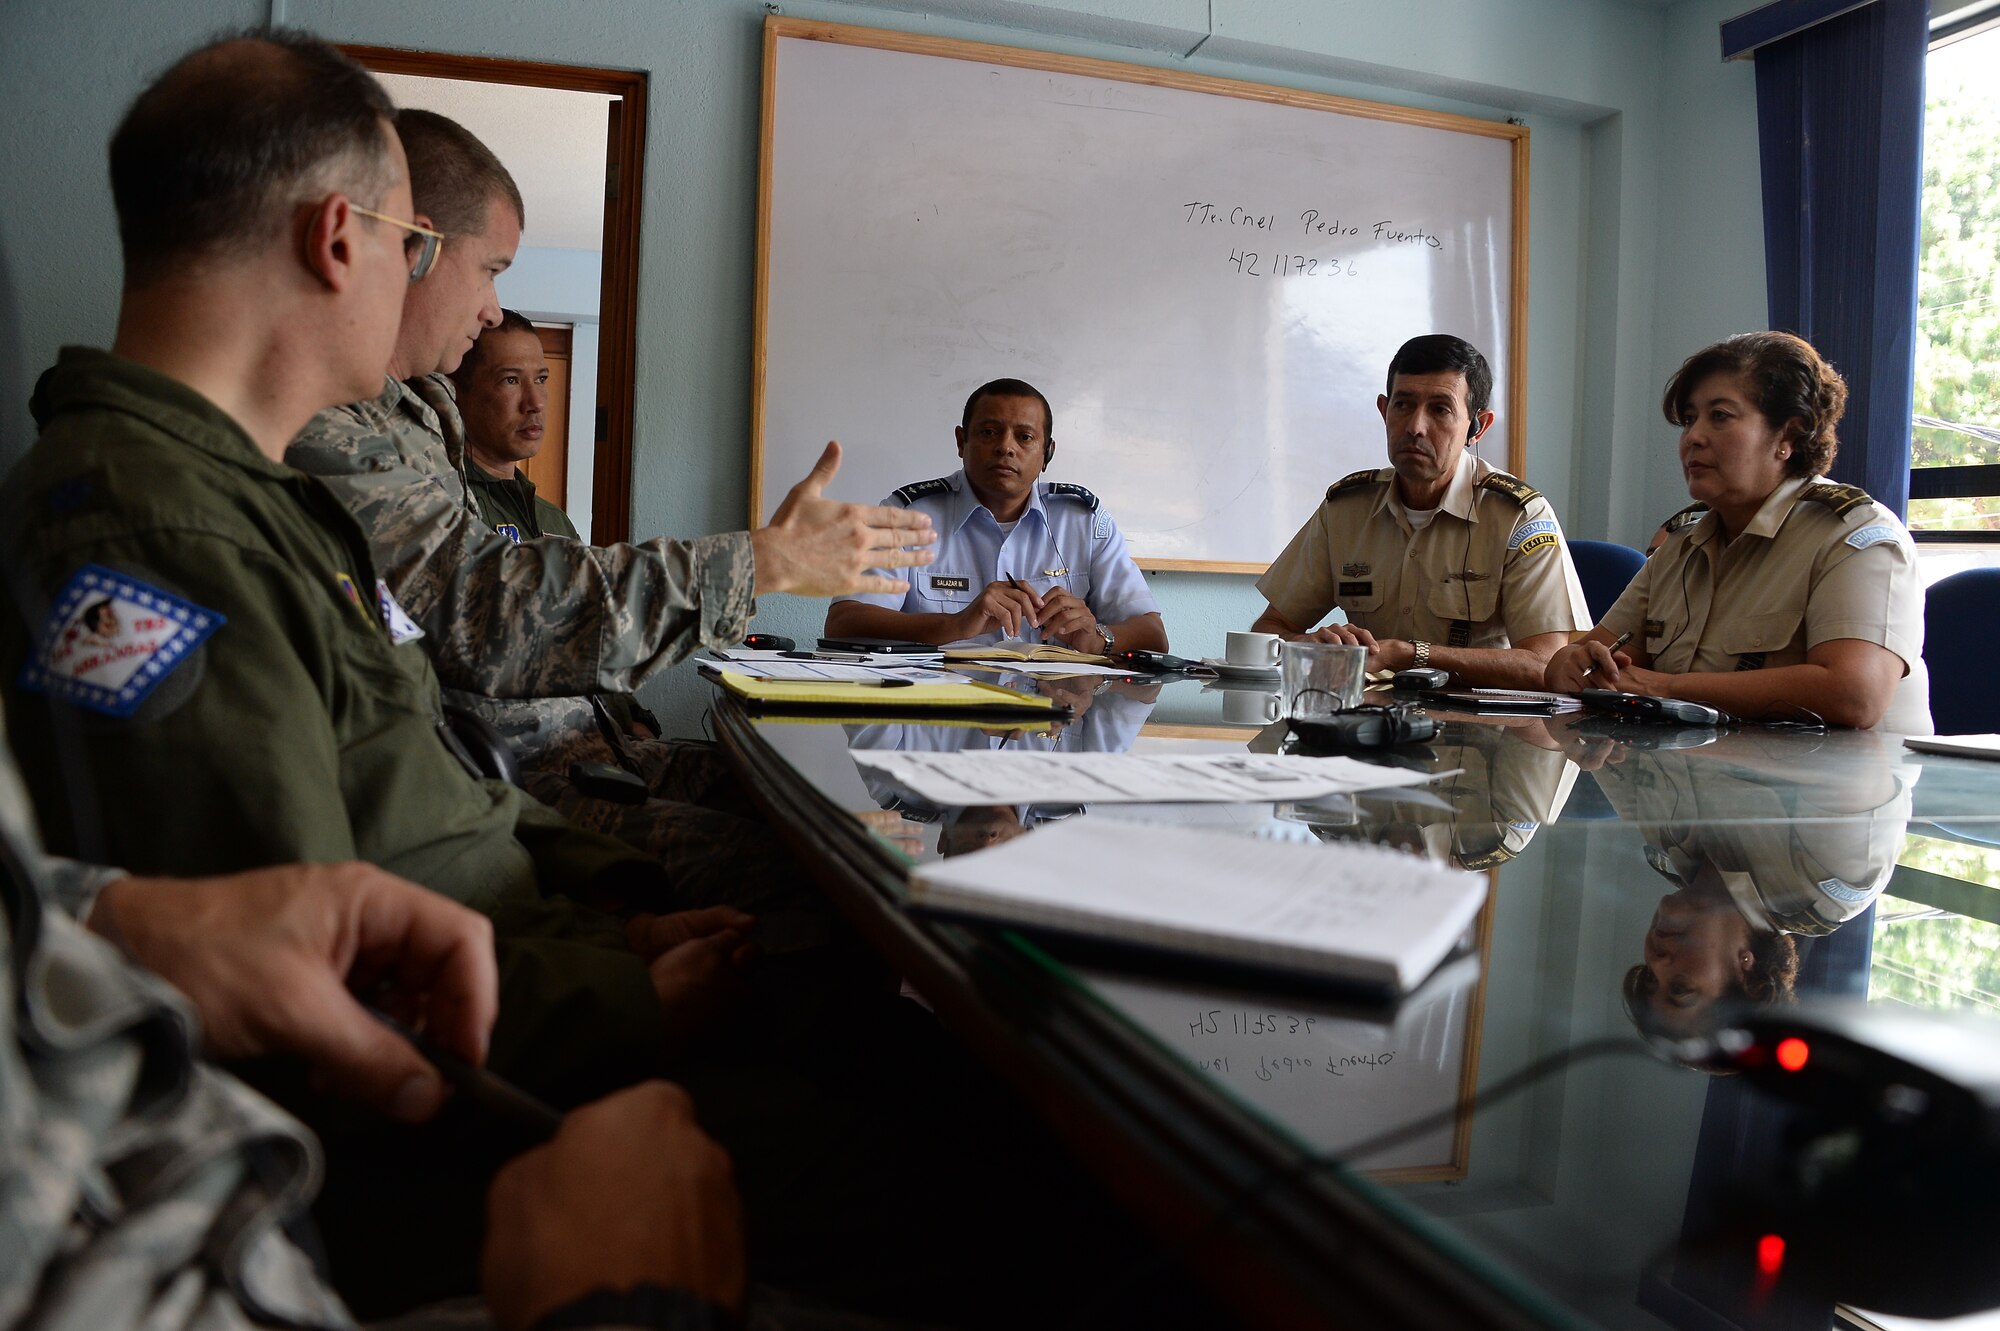 Members from the Guatemalan air force, Arkansas Air National Guard, and 12th Air Force (Air Forces Southern) discuss their goals during a subject matter expert exchange in Guatemala City, Guatemala, Aug. 4, 2014.  Goals focused on educating the Guatemalan air force on individual readiness and establishing standards for flight medicine.  (U.S. Air Force photo by Tech. Sgt. Heather R. Redman/Released) 